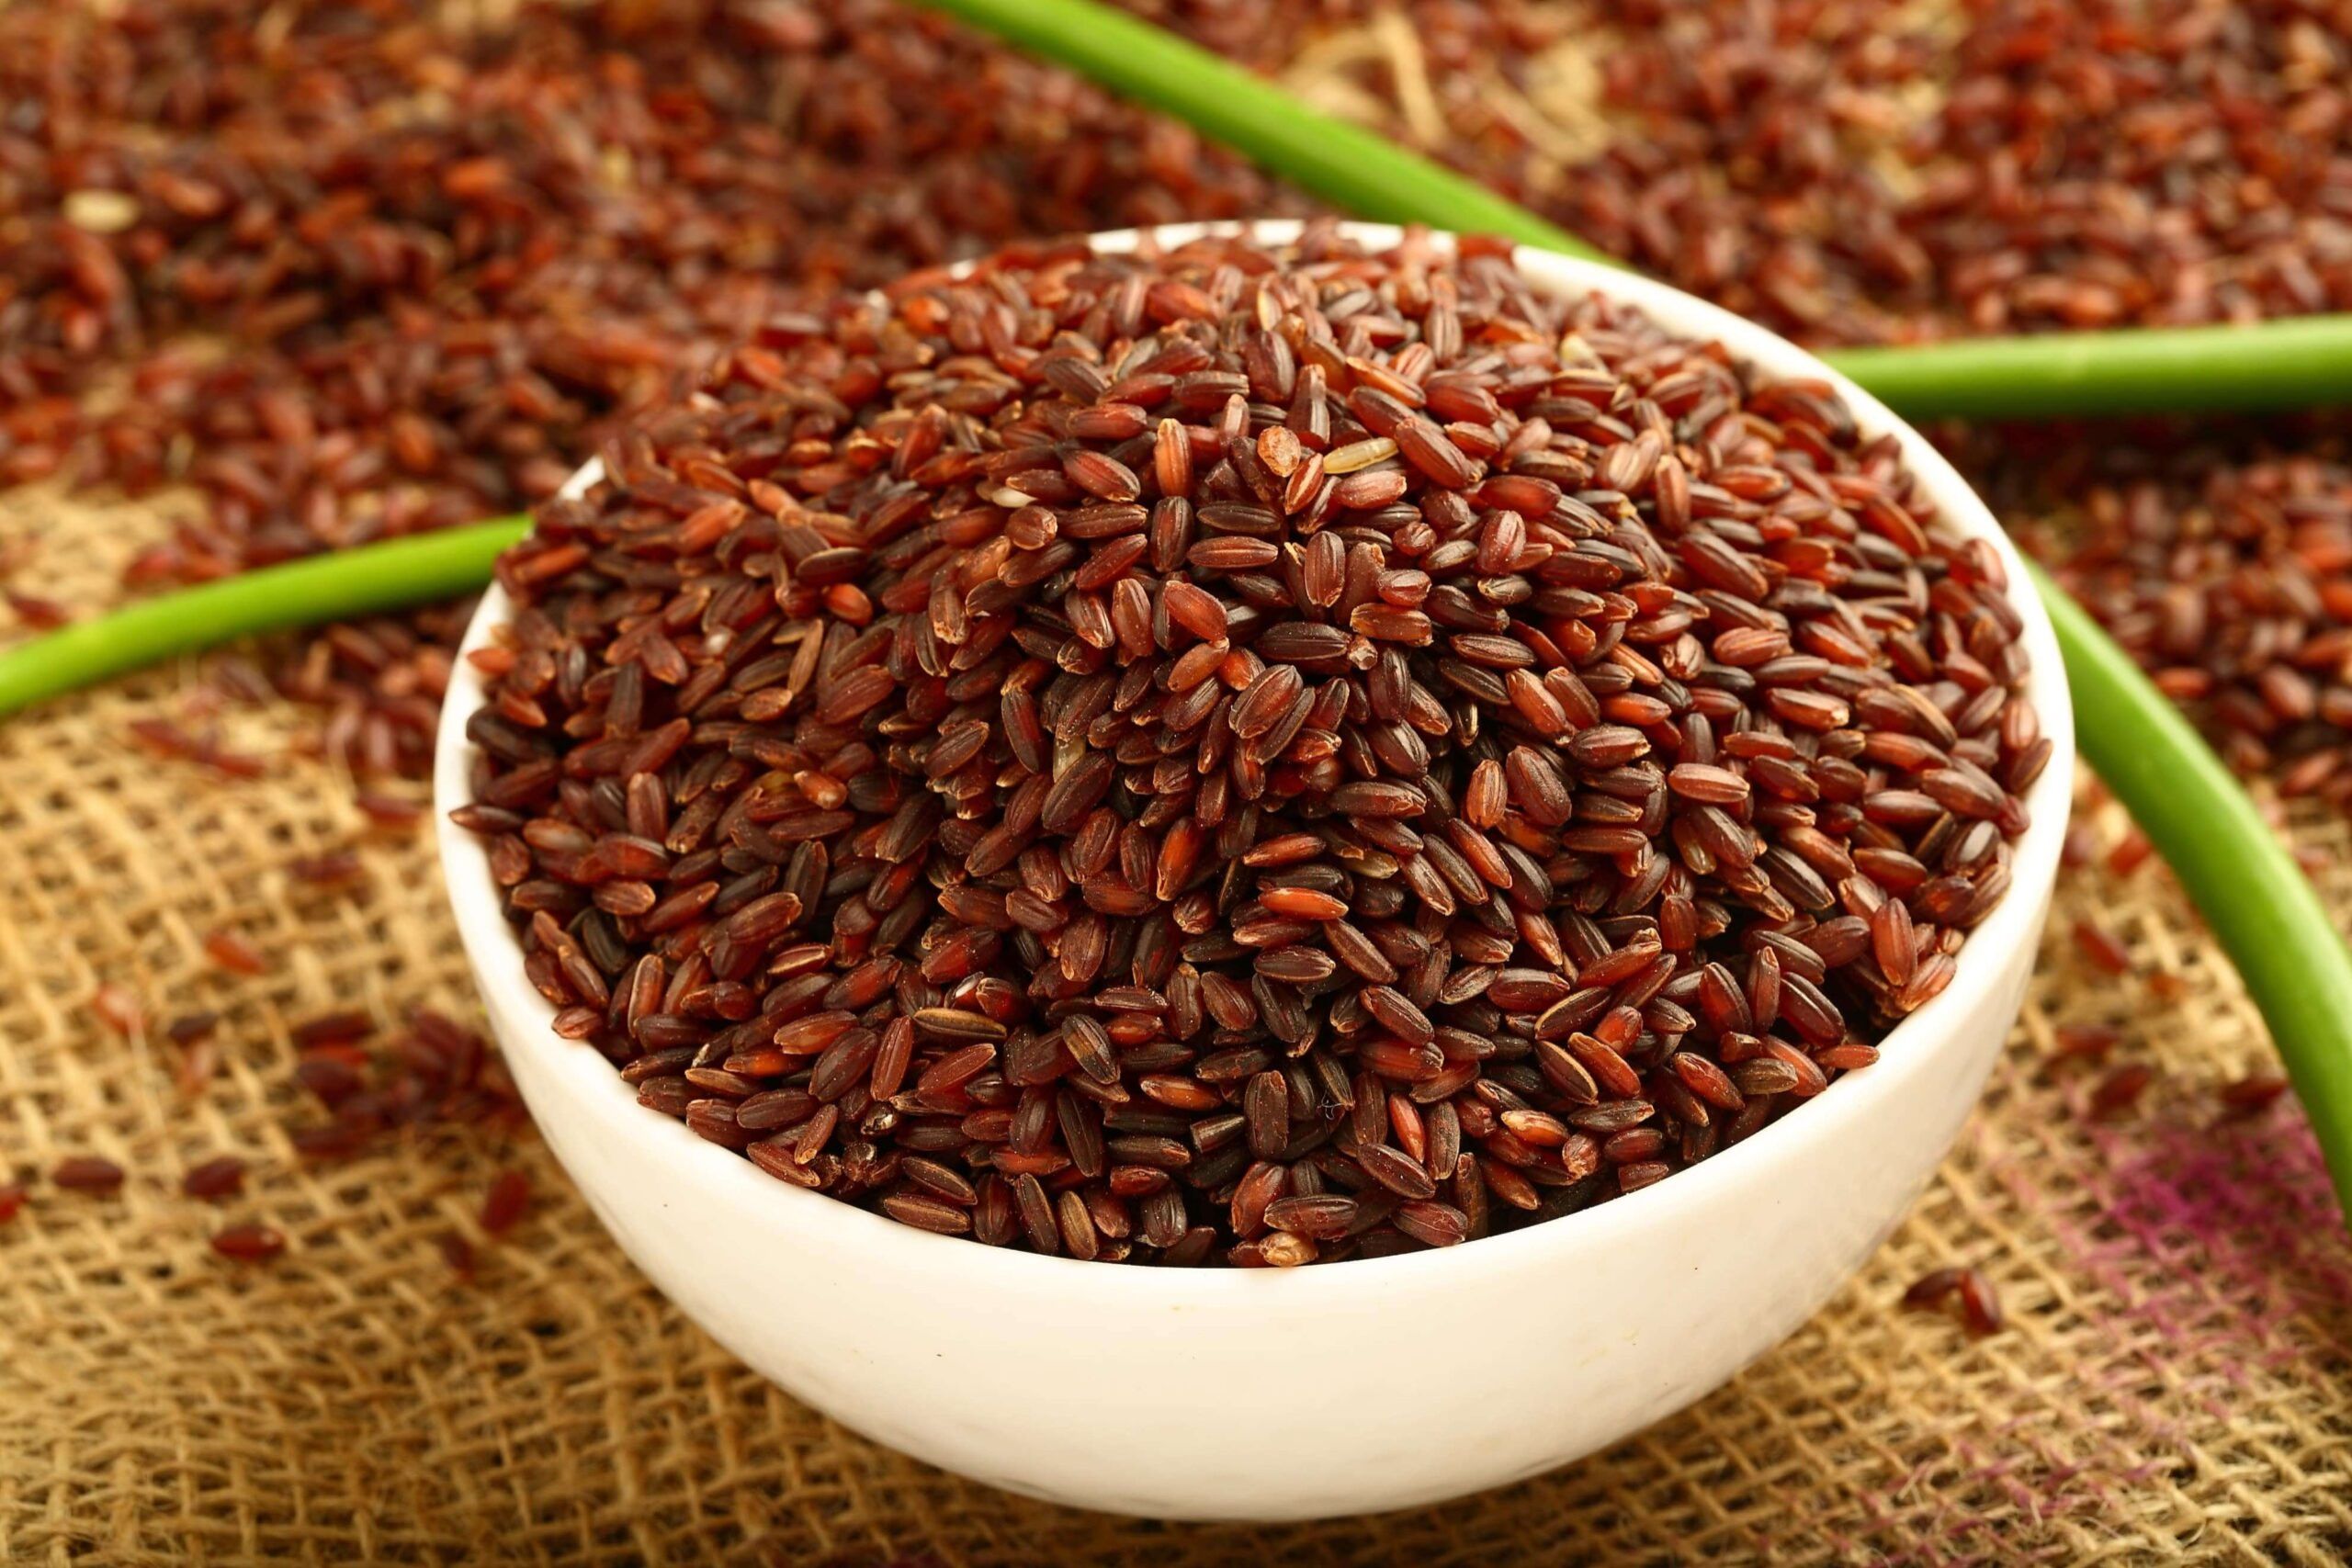 Red Rice Provides Amazing Health Benefits